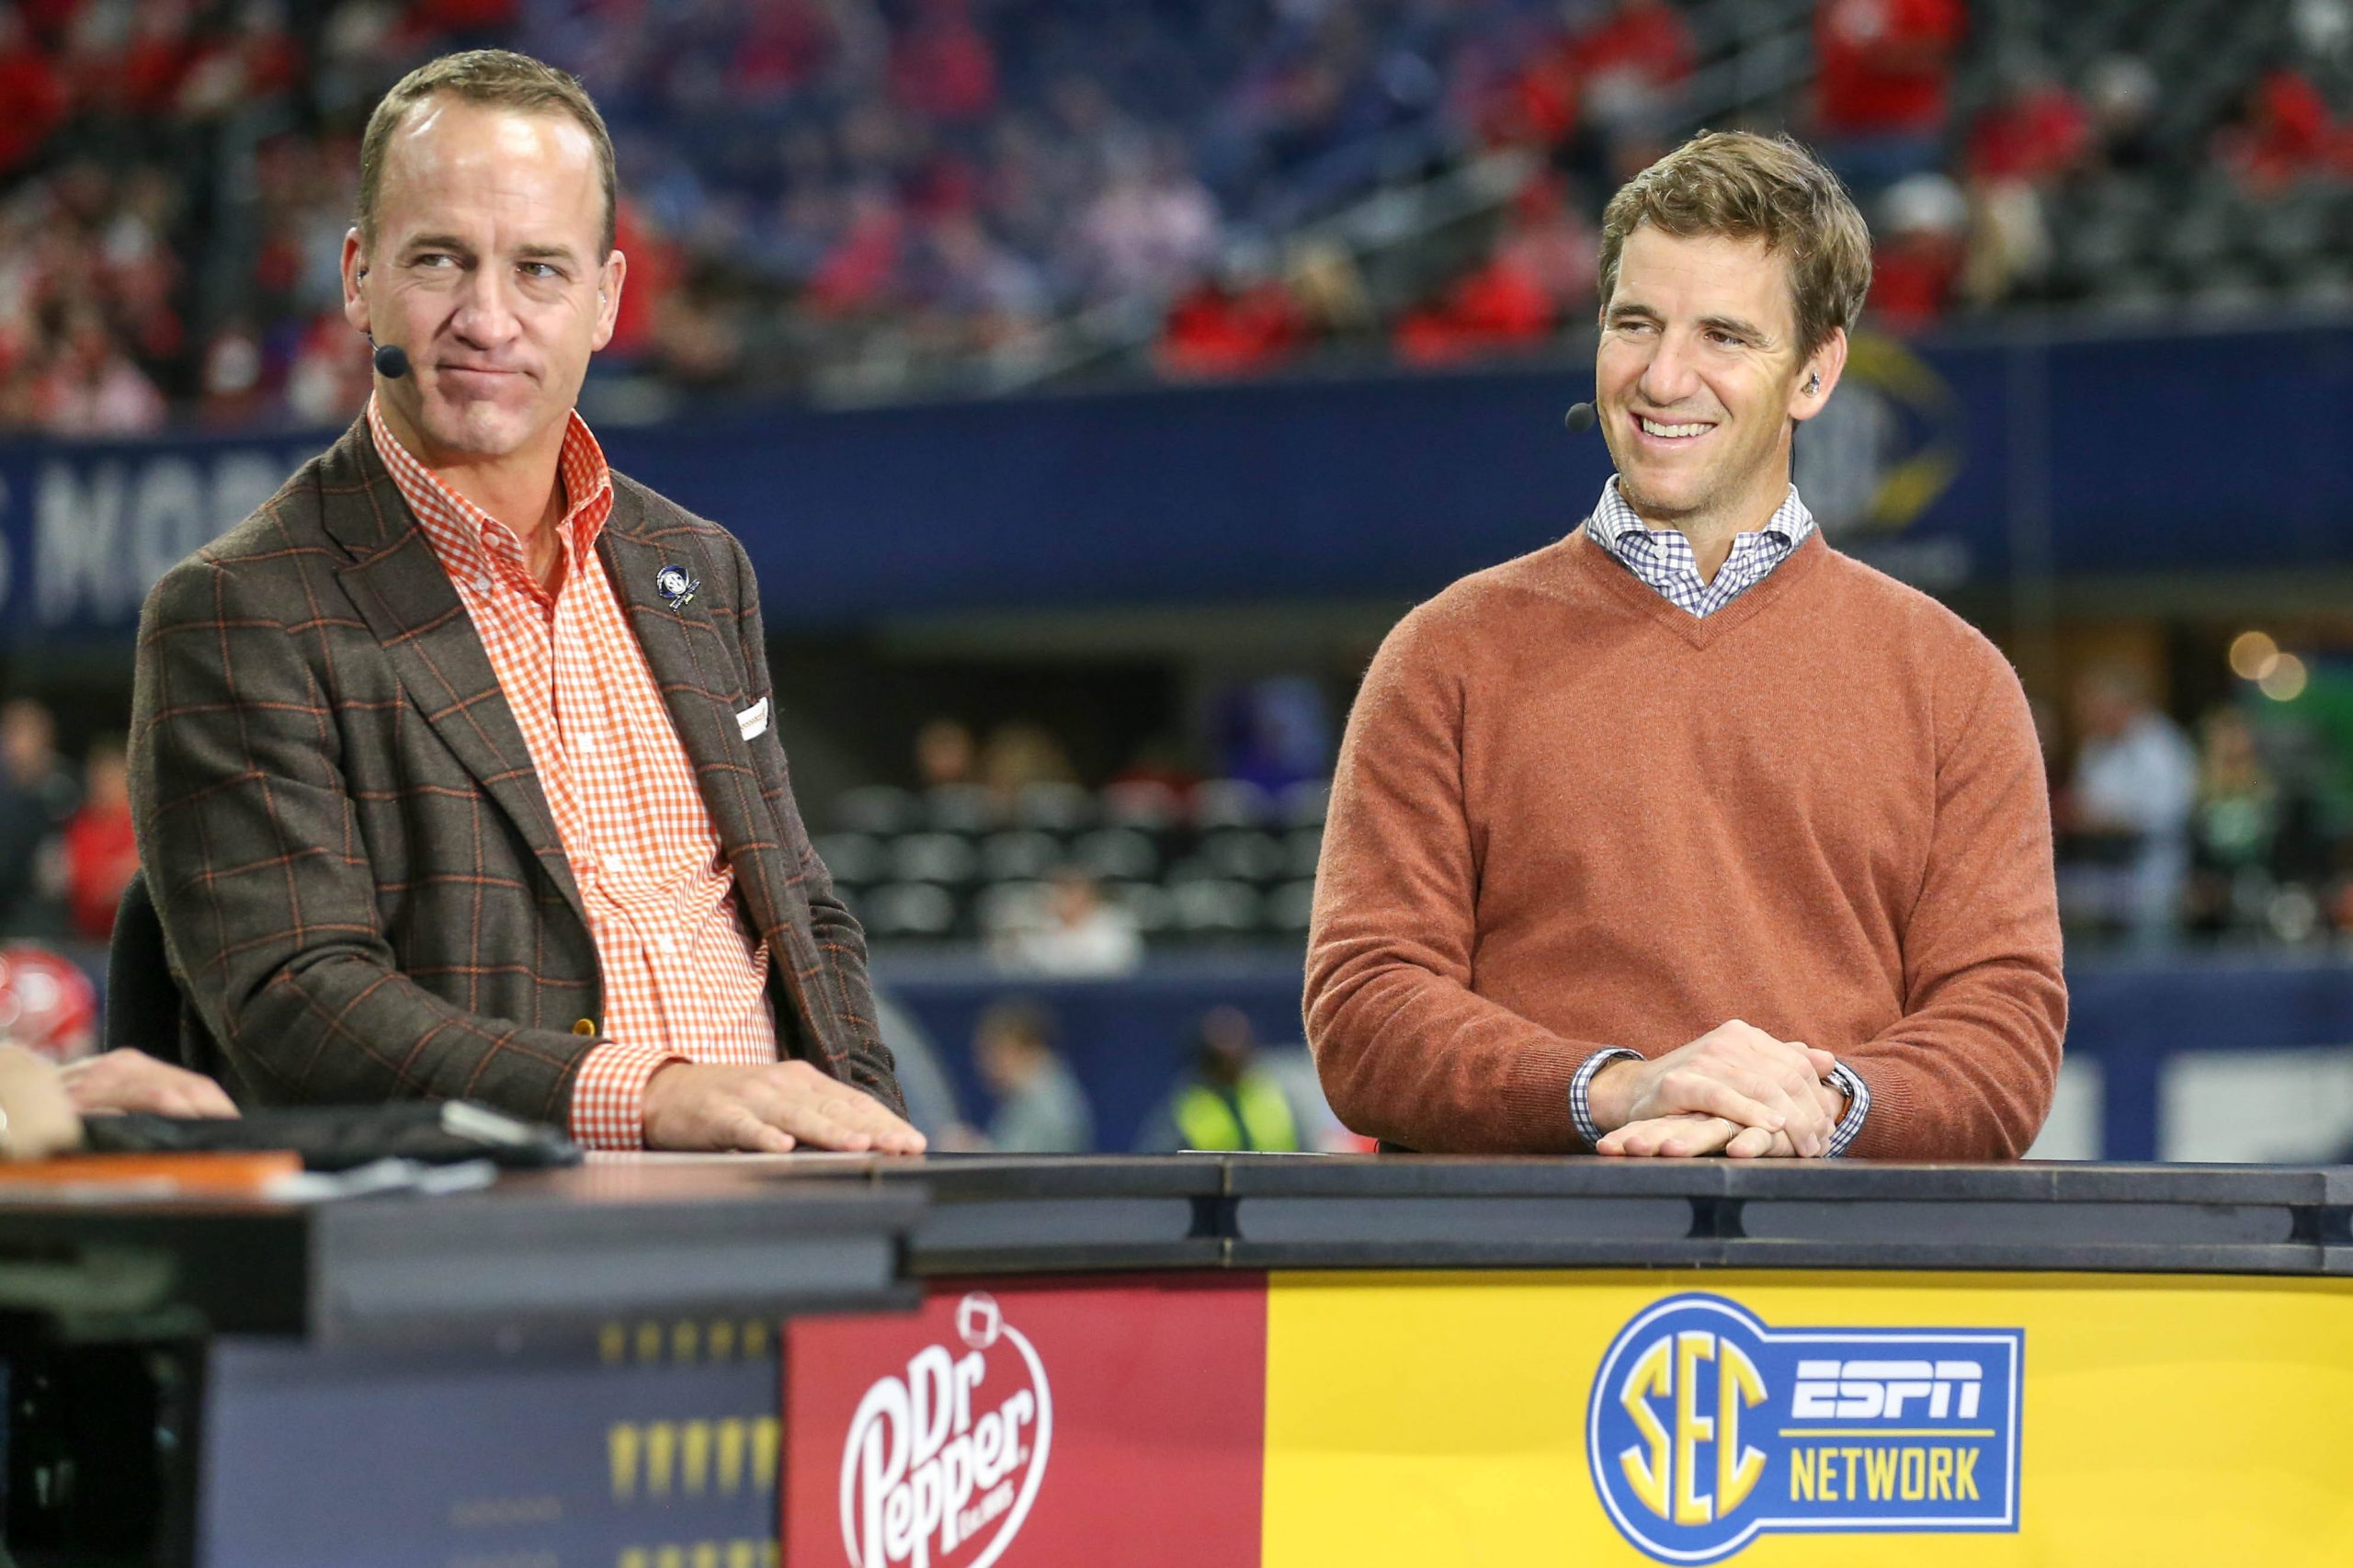 December 03, 2022: SEC Legends Peyton Manning and brother Eli Manning are interviewed on the set of SEC Nation prior to SEC Championship action between the Georgia Bulldogs and the LSU Tigers at the Mercedes Benz Stadium in Atlanta, GA. /CSM Atlanta USA - ZUMAc04_ 20221203_zaf_c04_426 Copyright: xJonathanxMailhesx